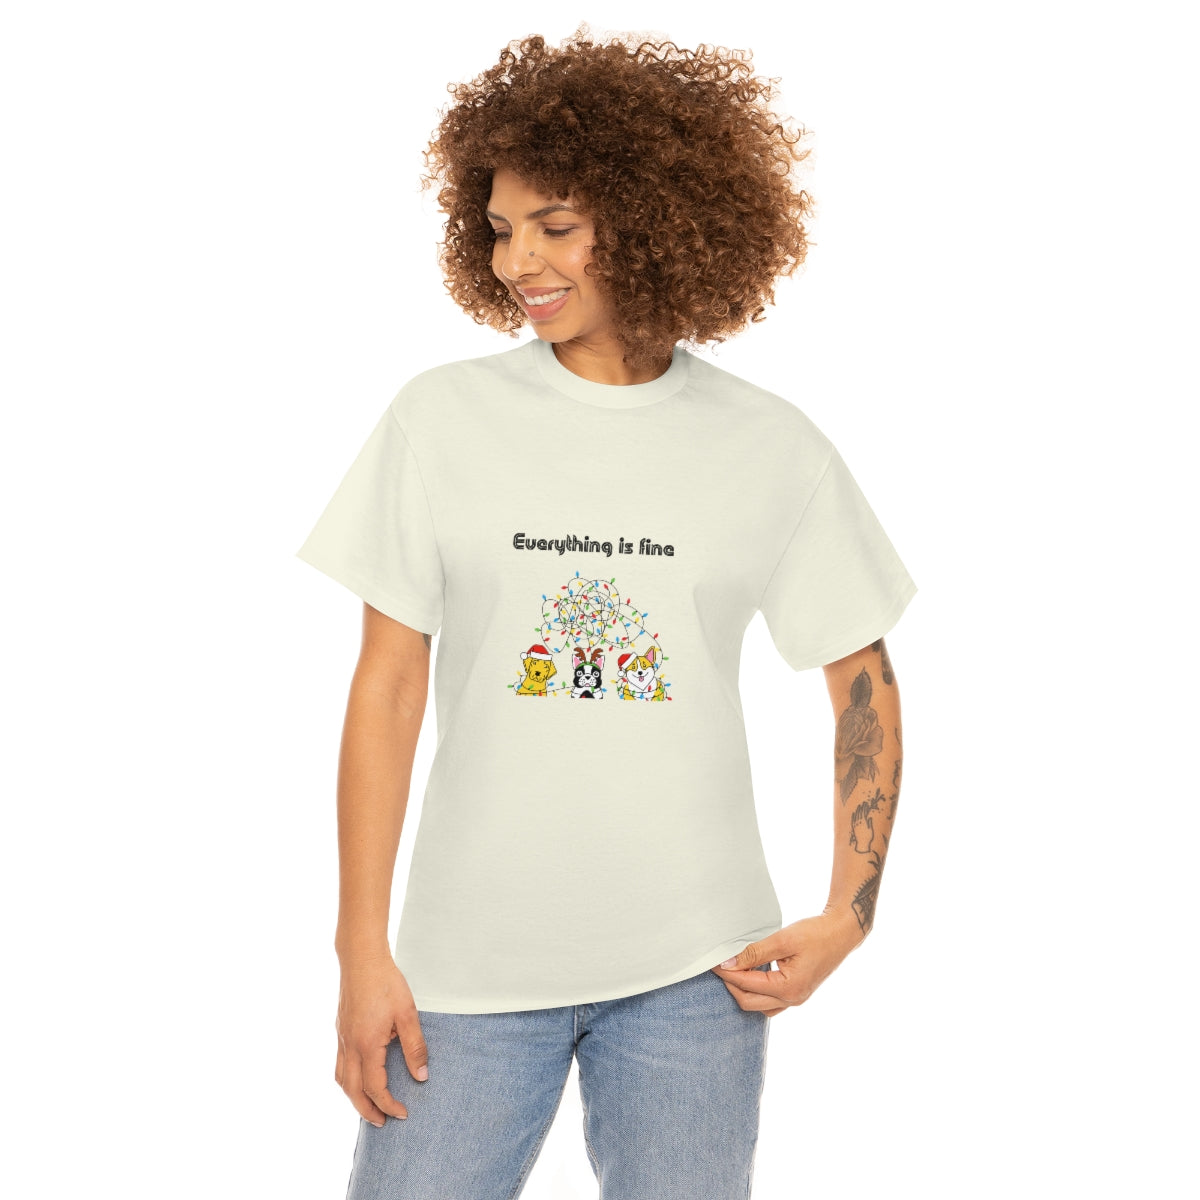 Everything is Fine Tshirt, I'm Fine Everything is Fine, Christmas Shirt, Funny Christmas Shirt, Sarcastic Tshirt, Funny Tshirt, Gift for Her - The Good Life Vibe